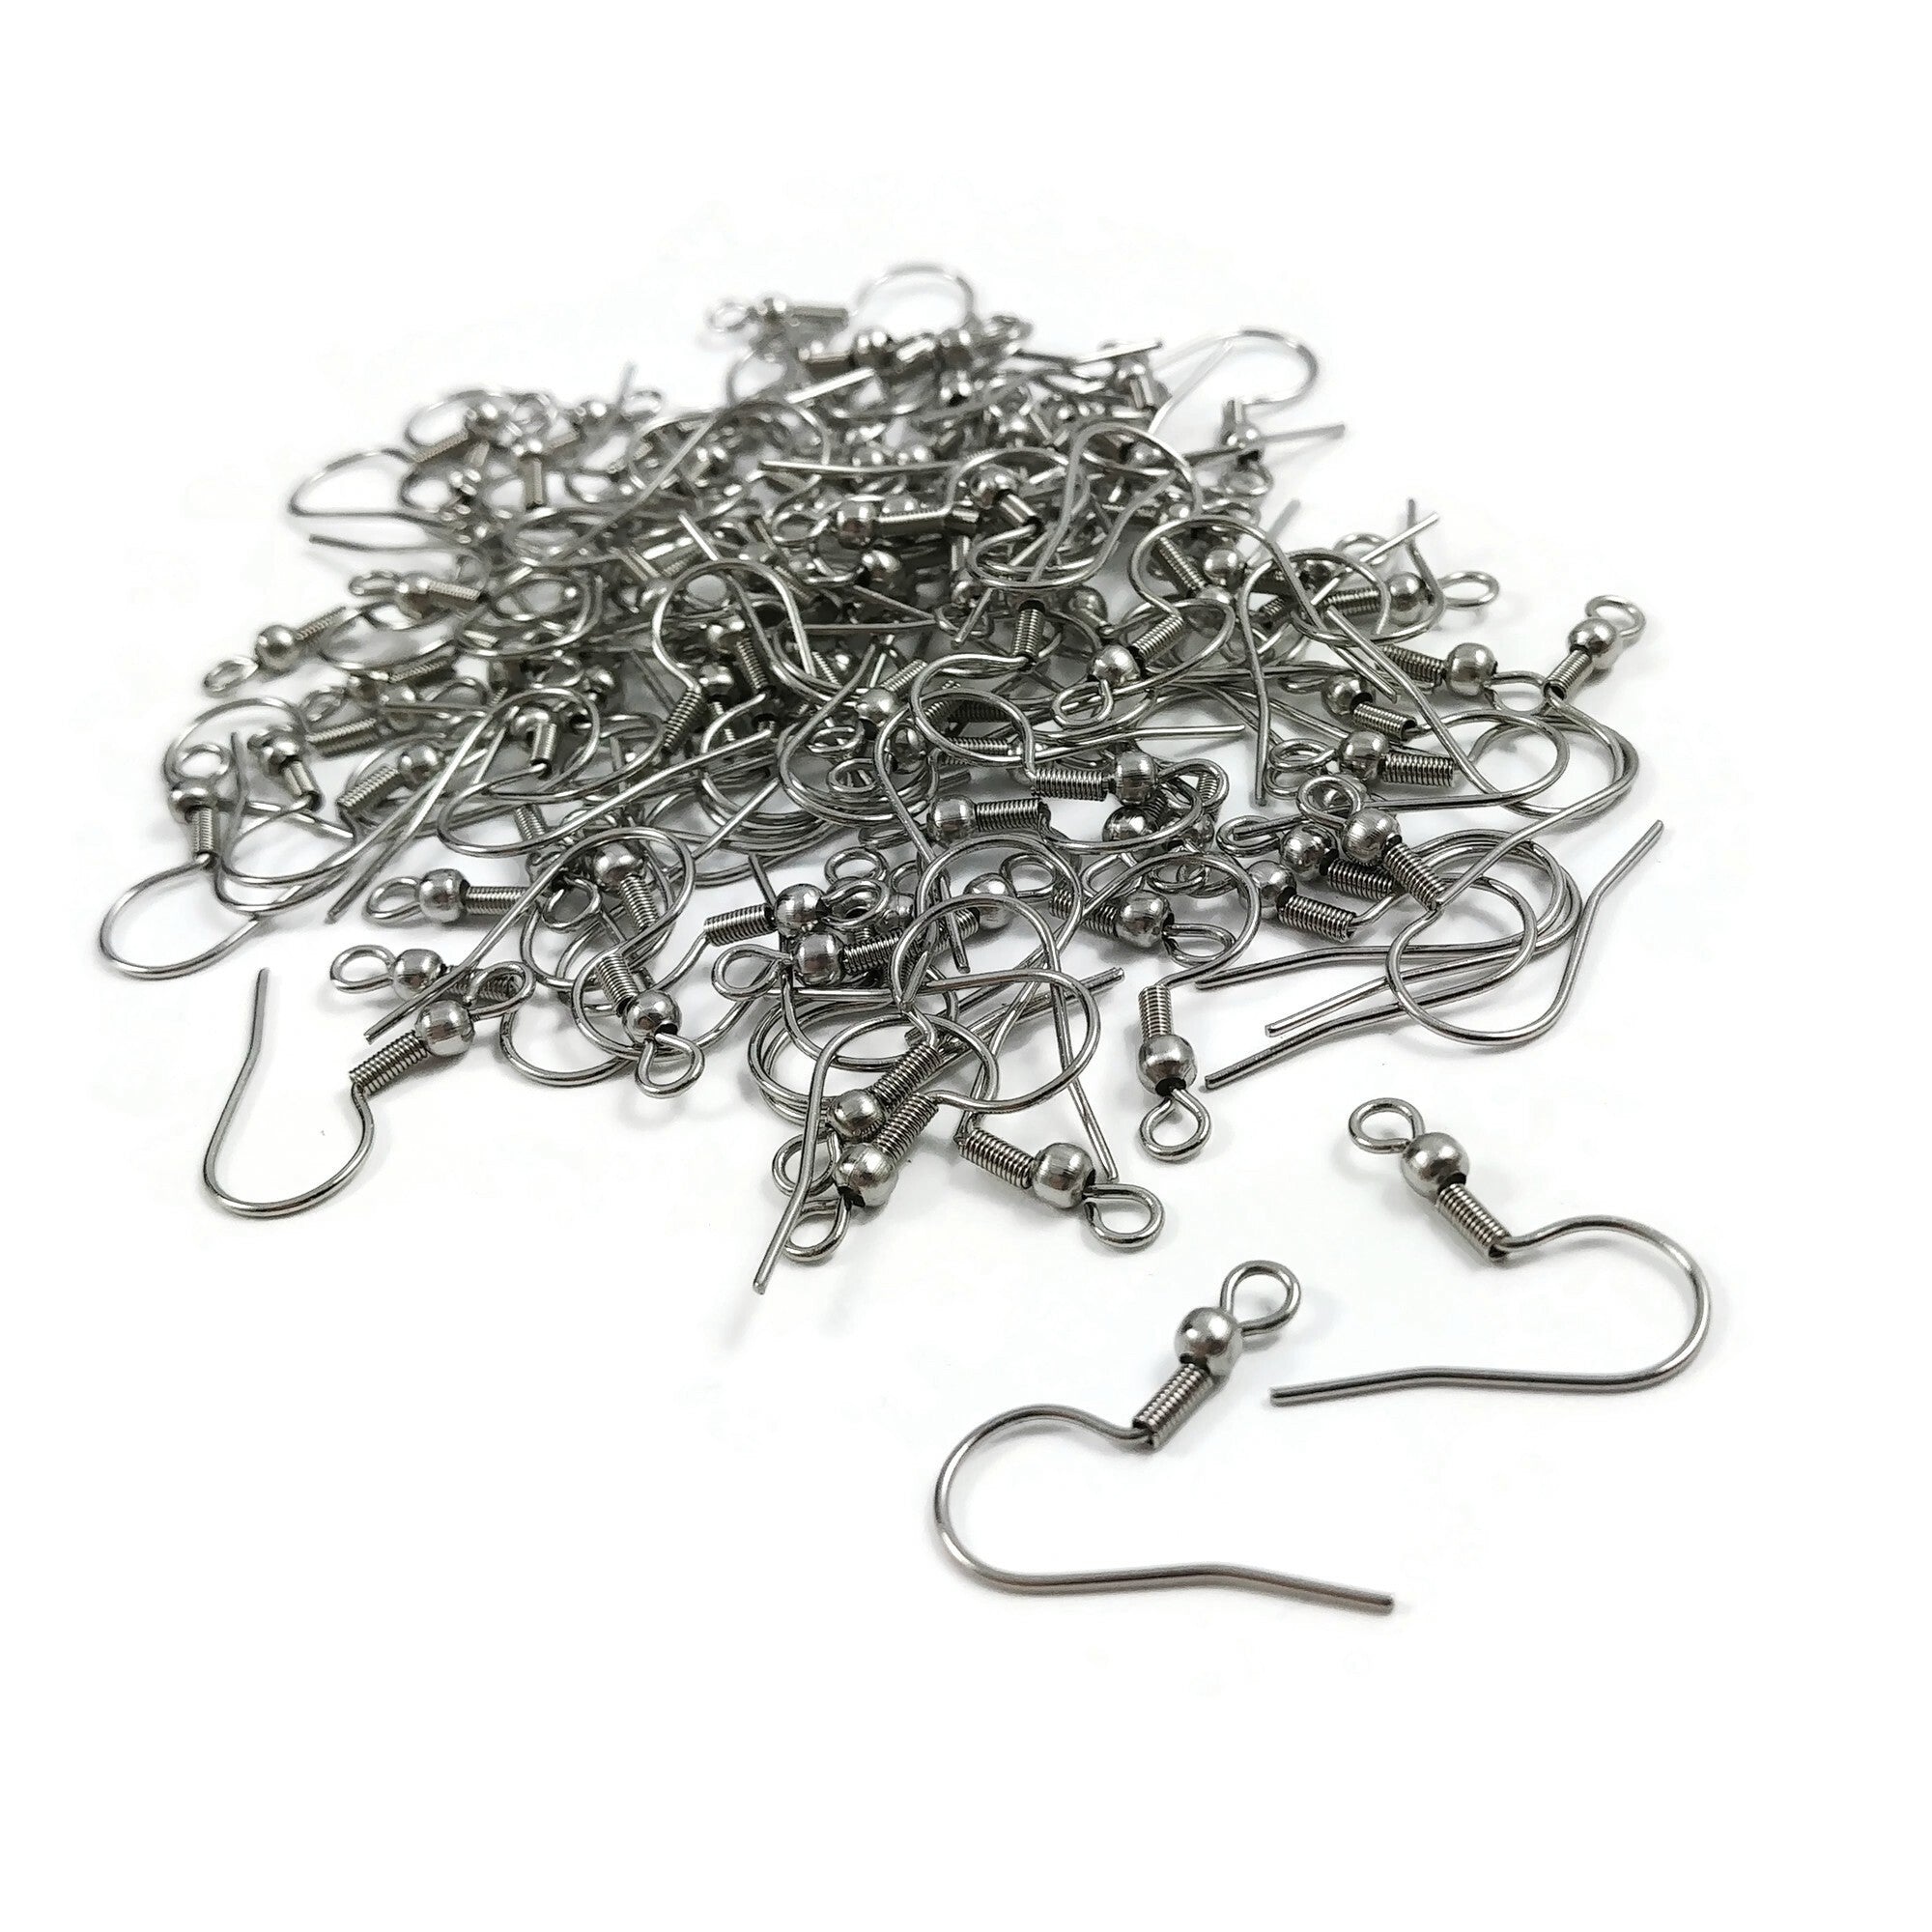 Stainless steel french earring hooks, 100pcs (50 pairs) Hypoallergenic ear wire